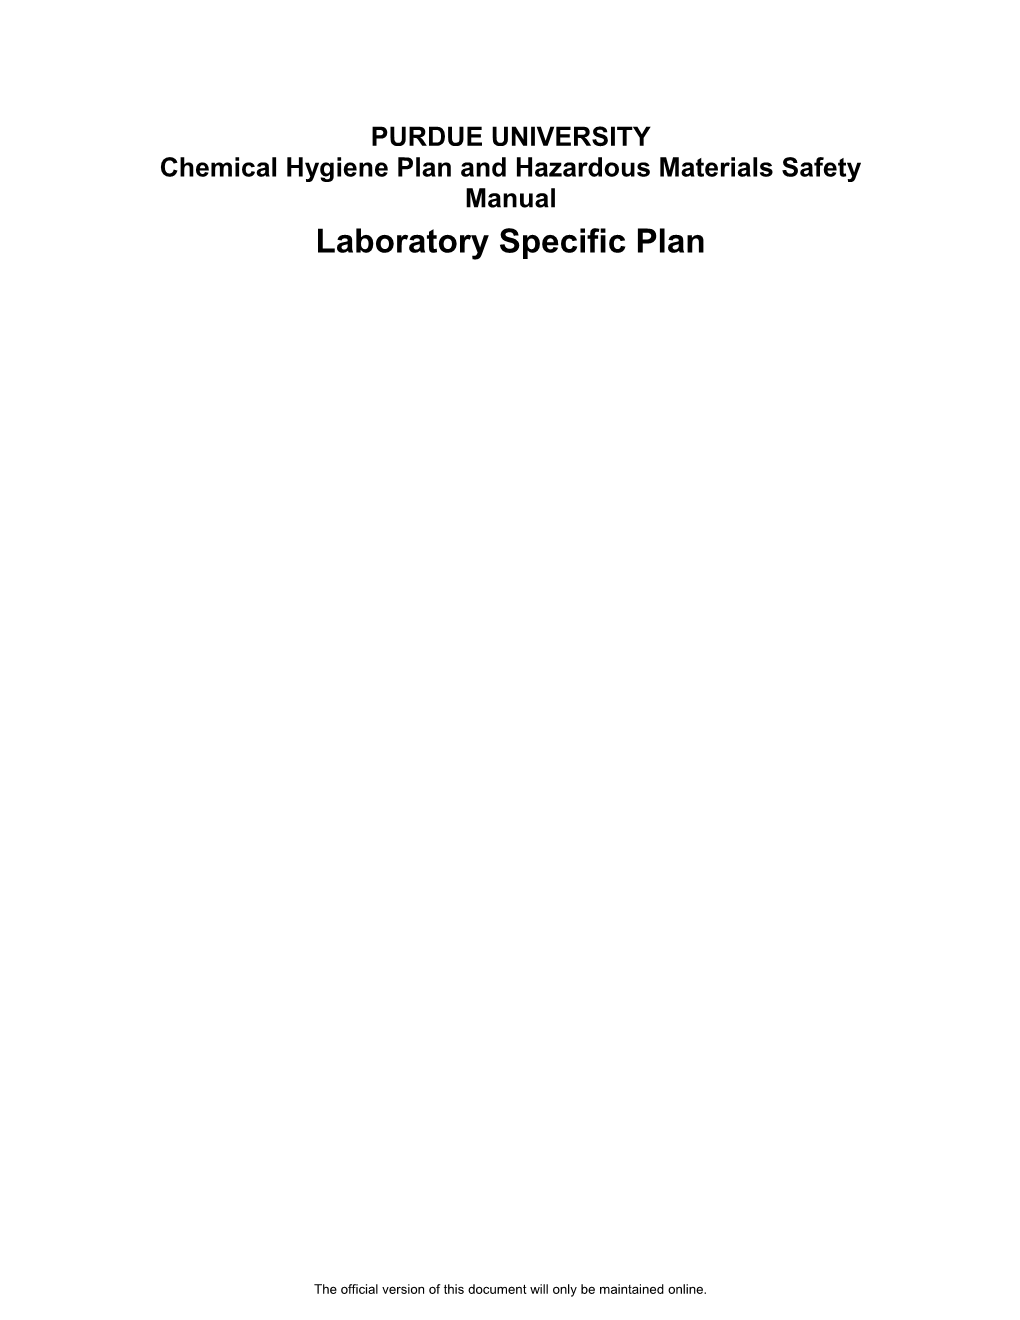 Chemical Hygiene Plan and Hazardous Materials Safety Manual